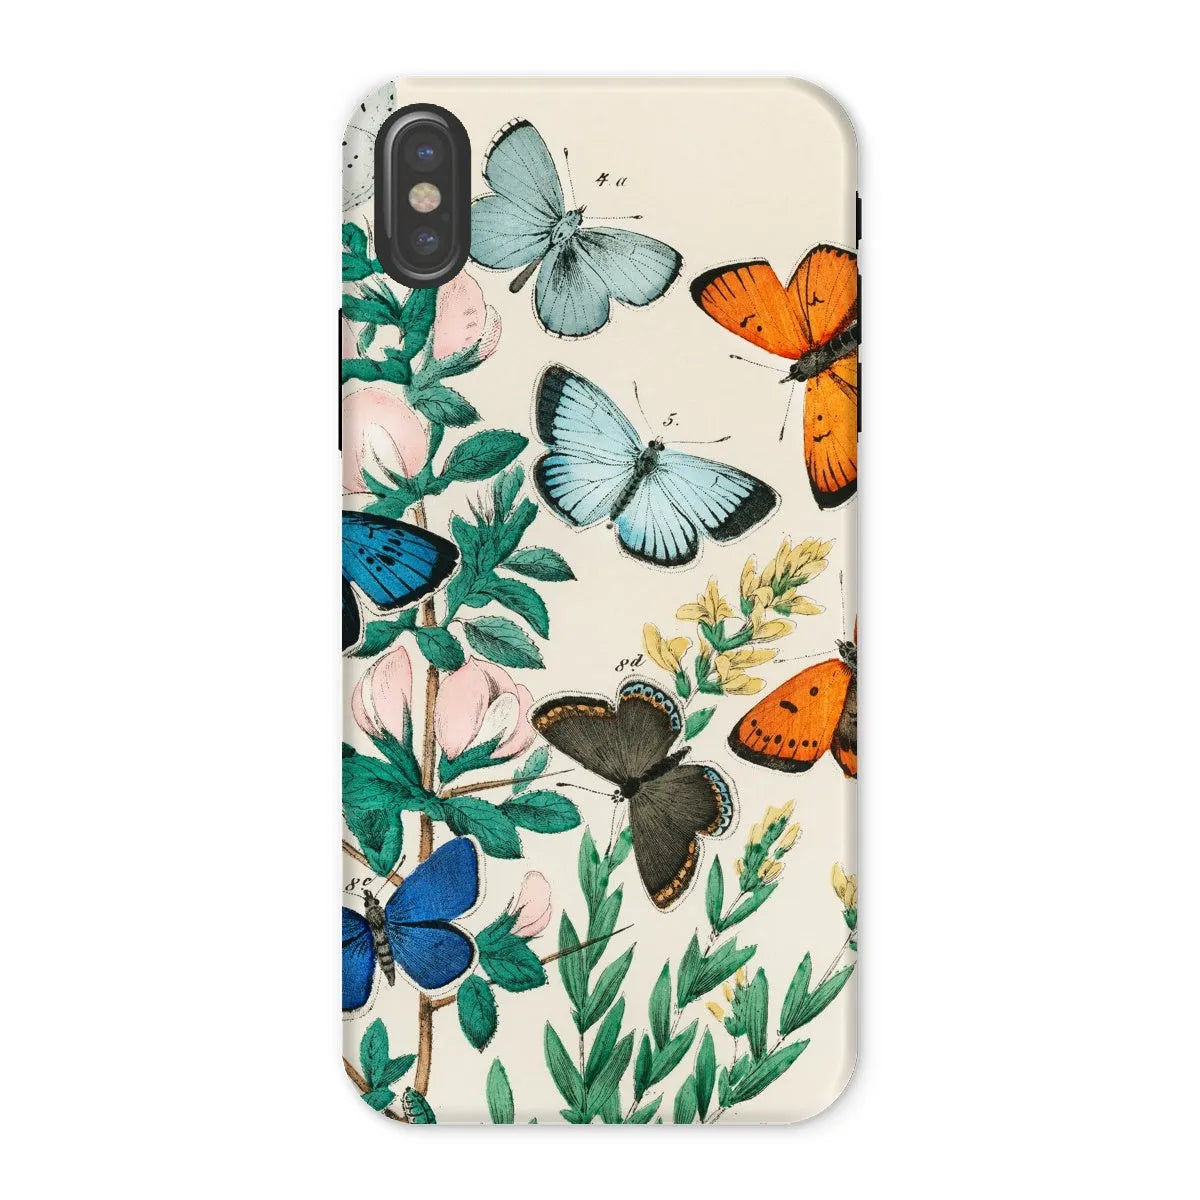 Another Butterfly Aesthetic Art Phone Case - William Forsell Kirby - Iphone x / Matte - Mobile Phone Cases - Aesthetic